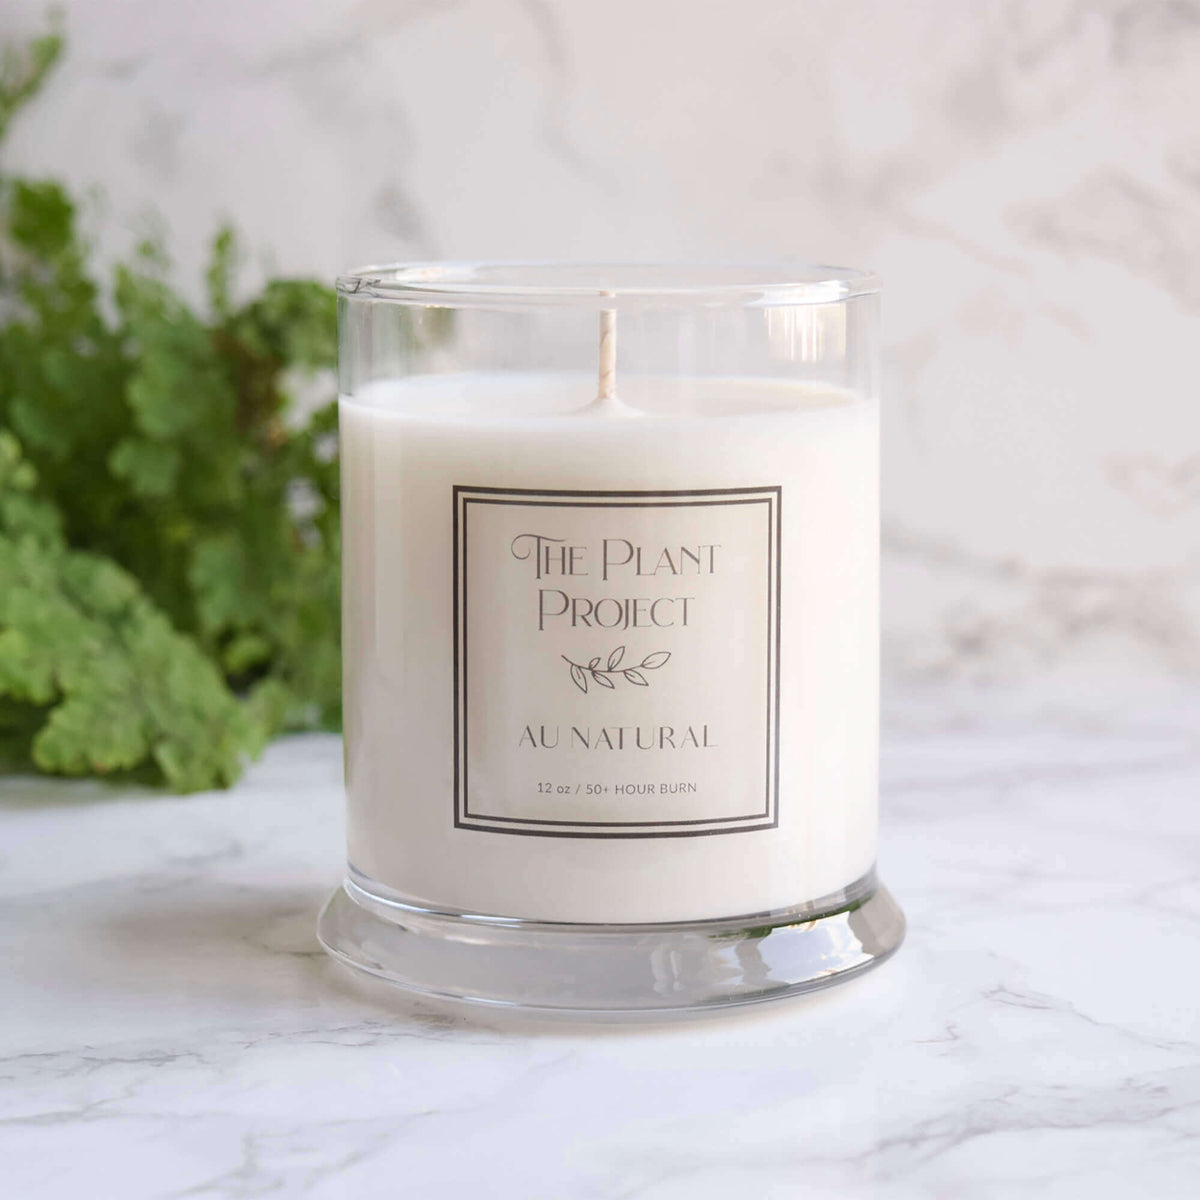 Au Natural Unscented Candle